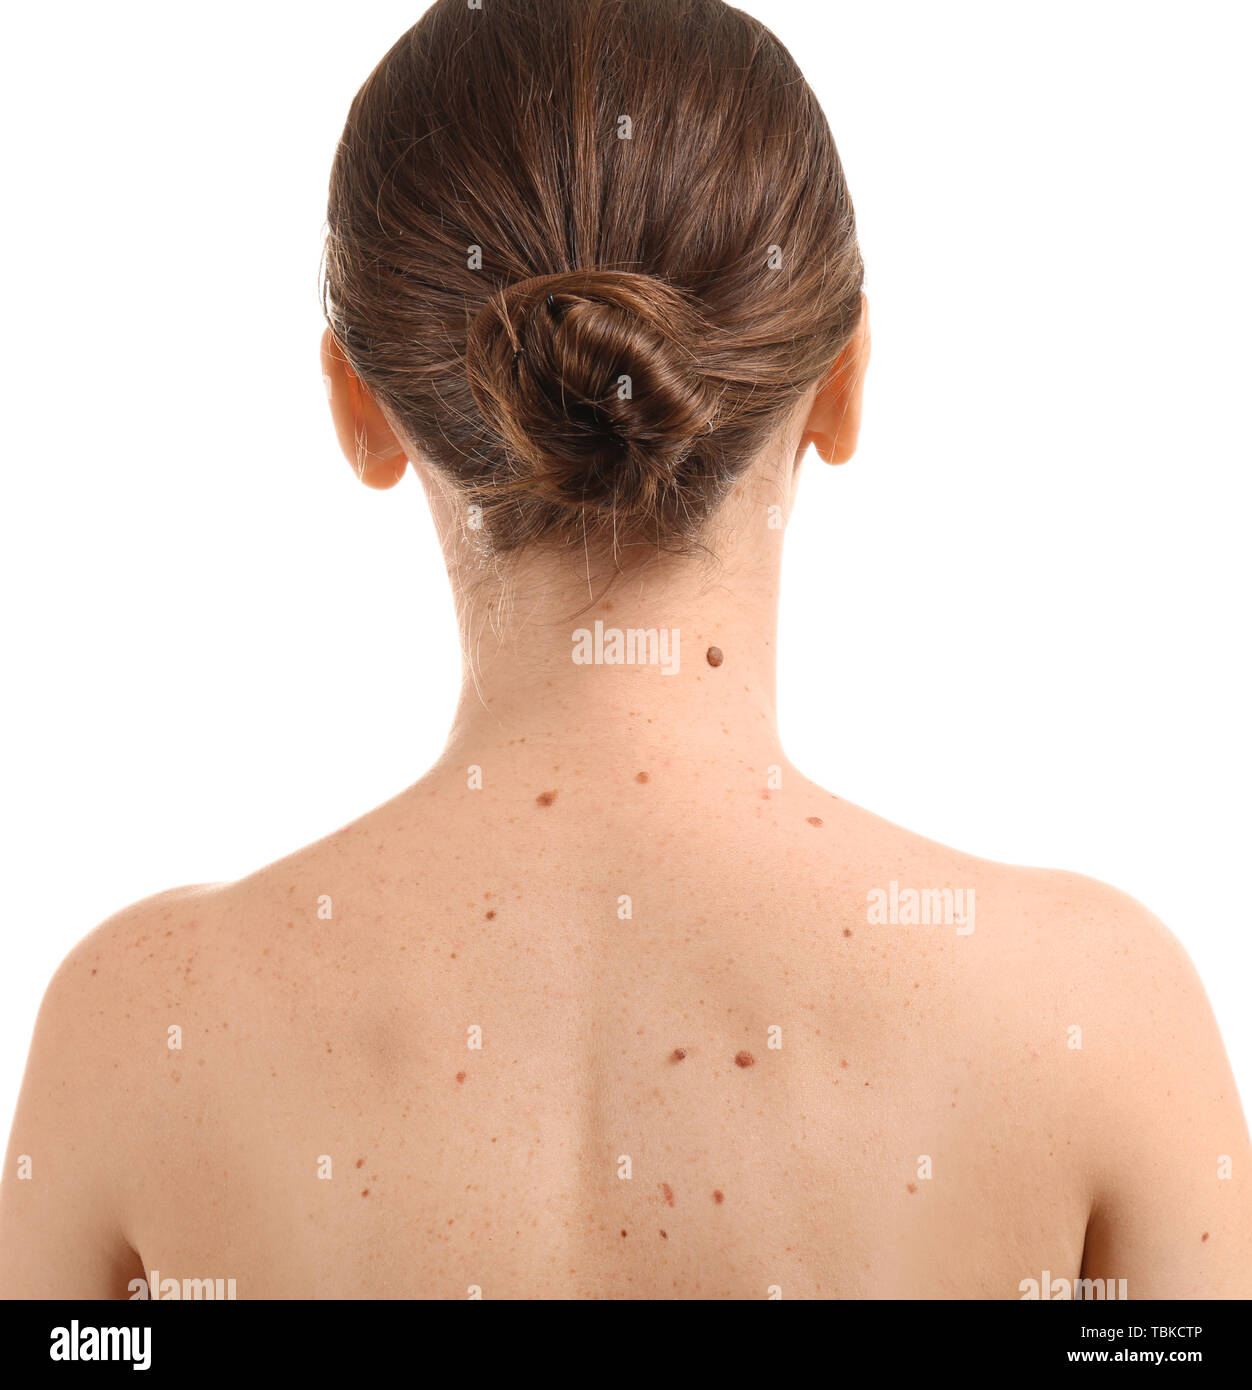 https://c8.alamy.com/comp/TBKCTP/young-woman-with-moles-on-white-background-TBKCTP.jpg